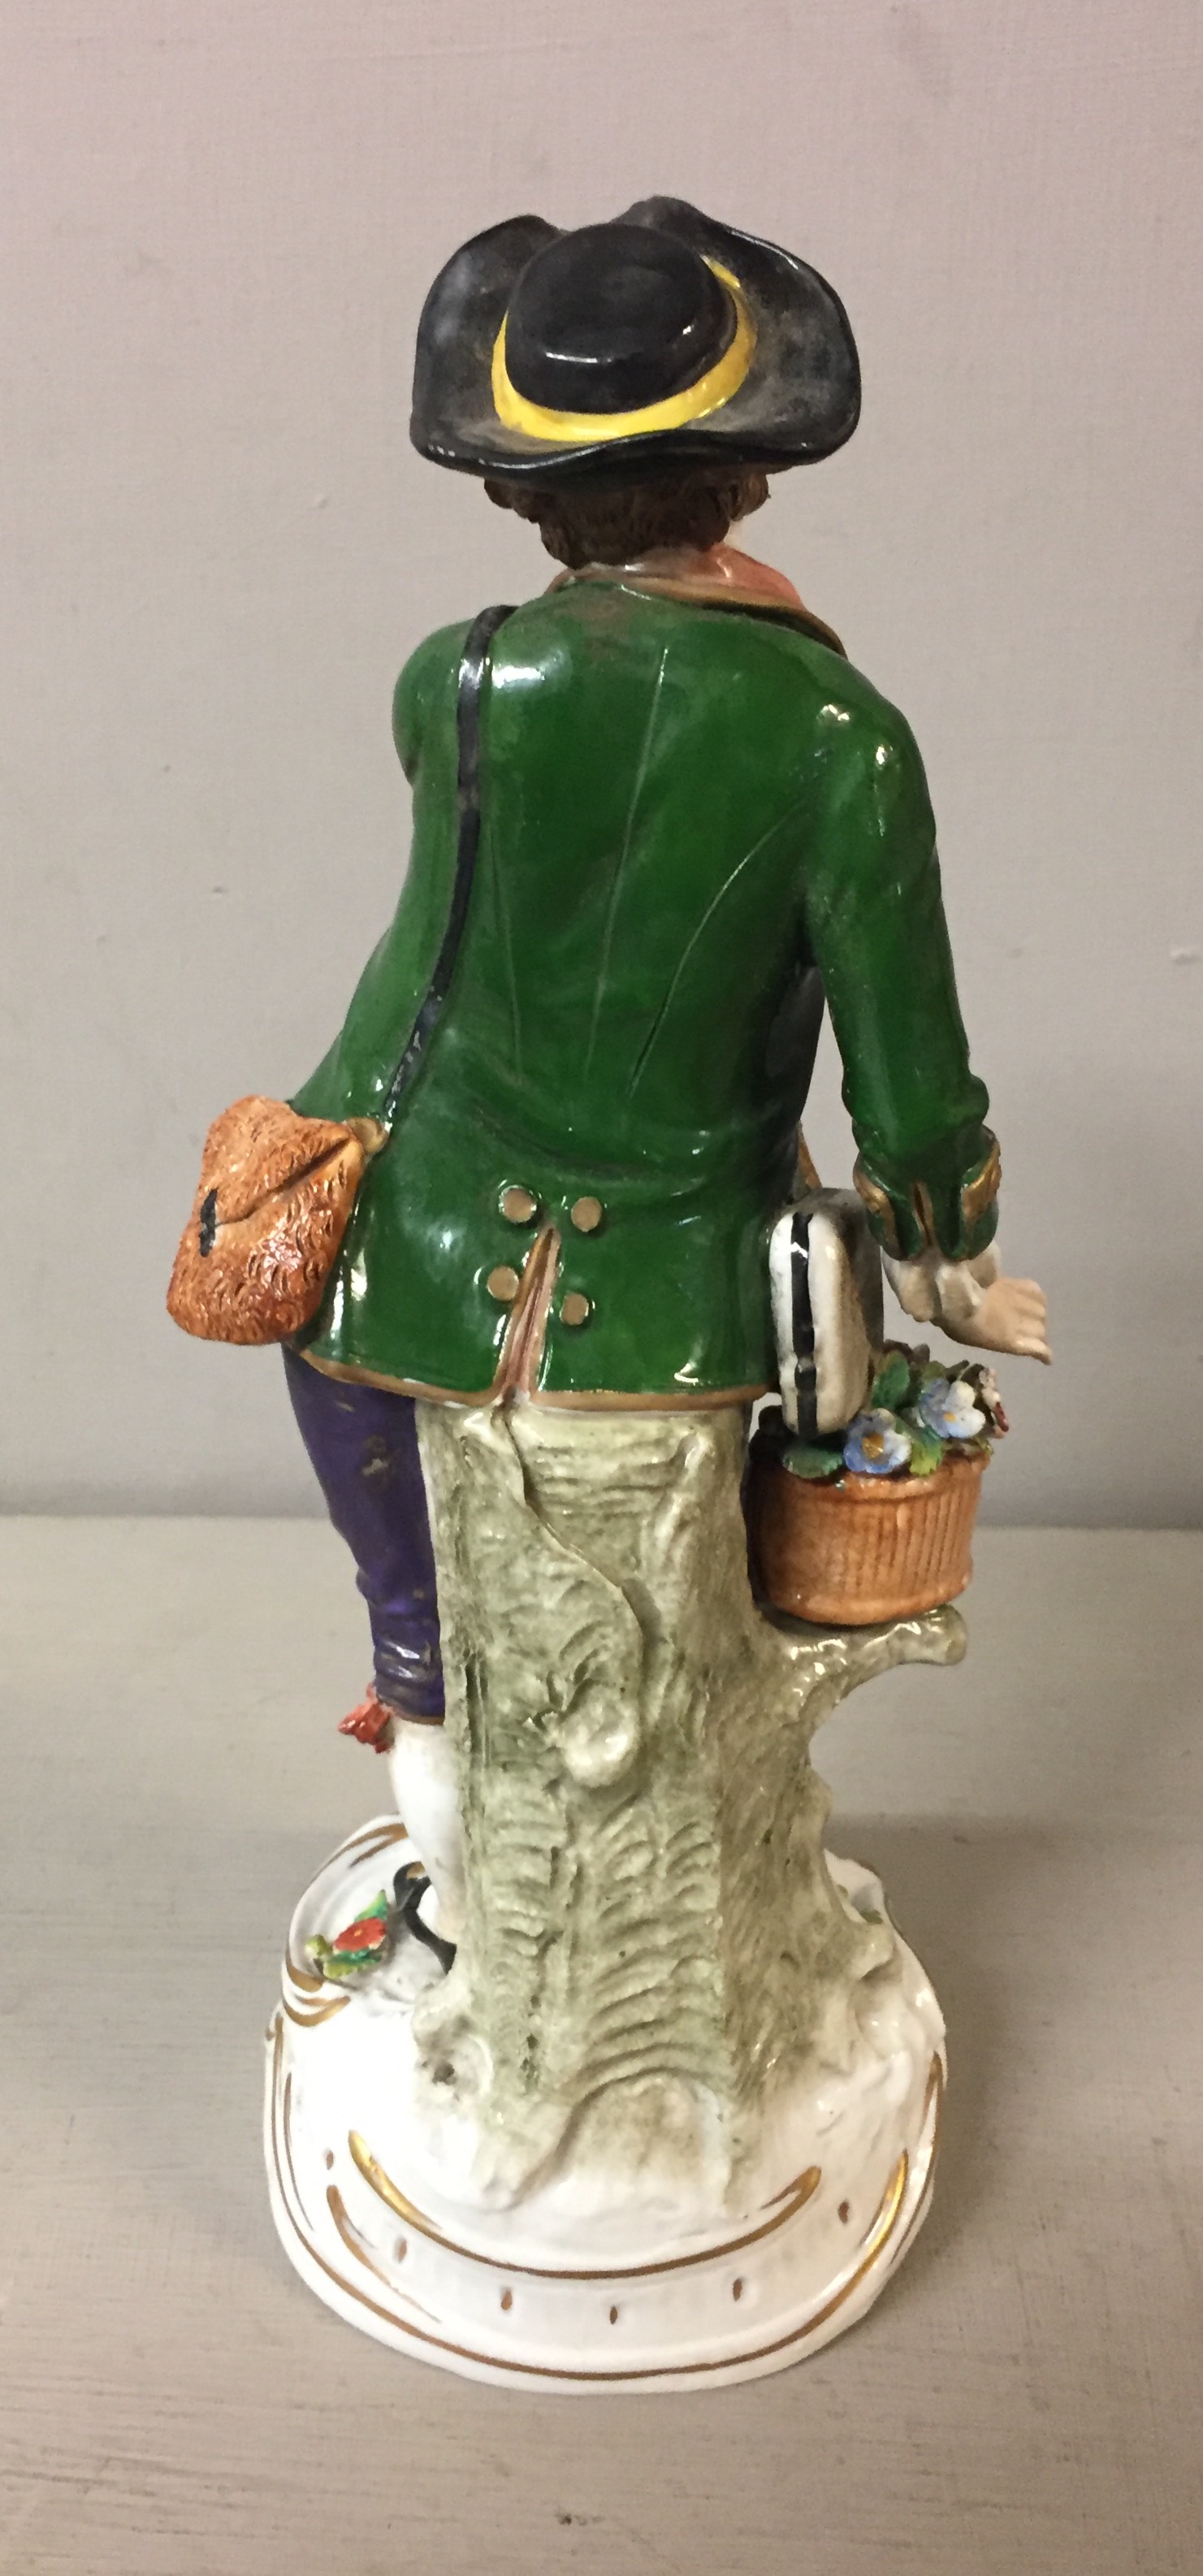 SITZENDORF, A 20TH CENTURY PORCELAIN FIGURE OF A GENTLEMAN GARDENER Of the 18th Century in a tricorn - Image 2 of 3